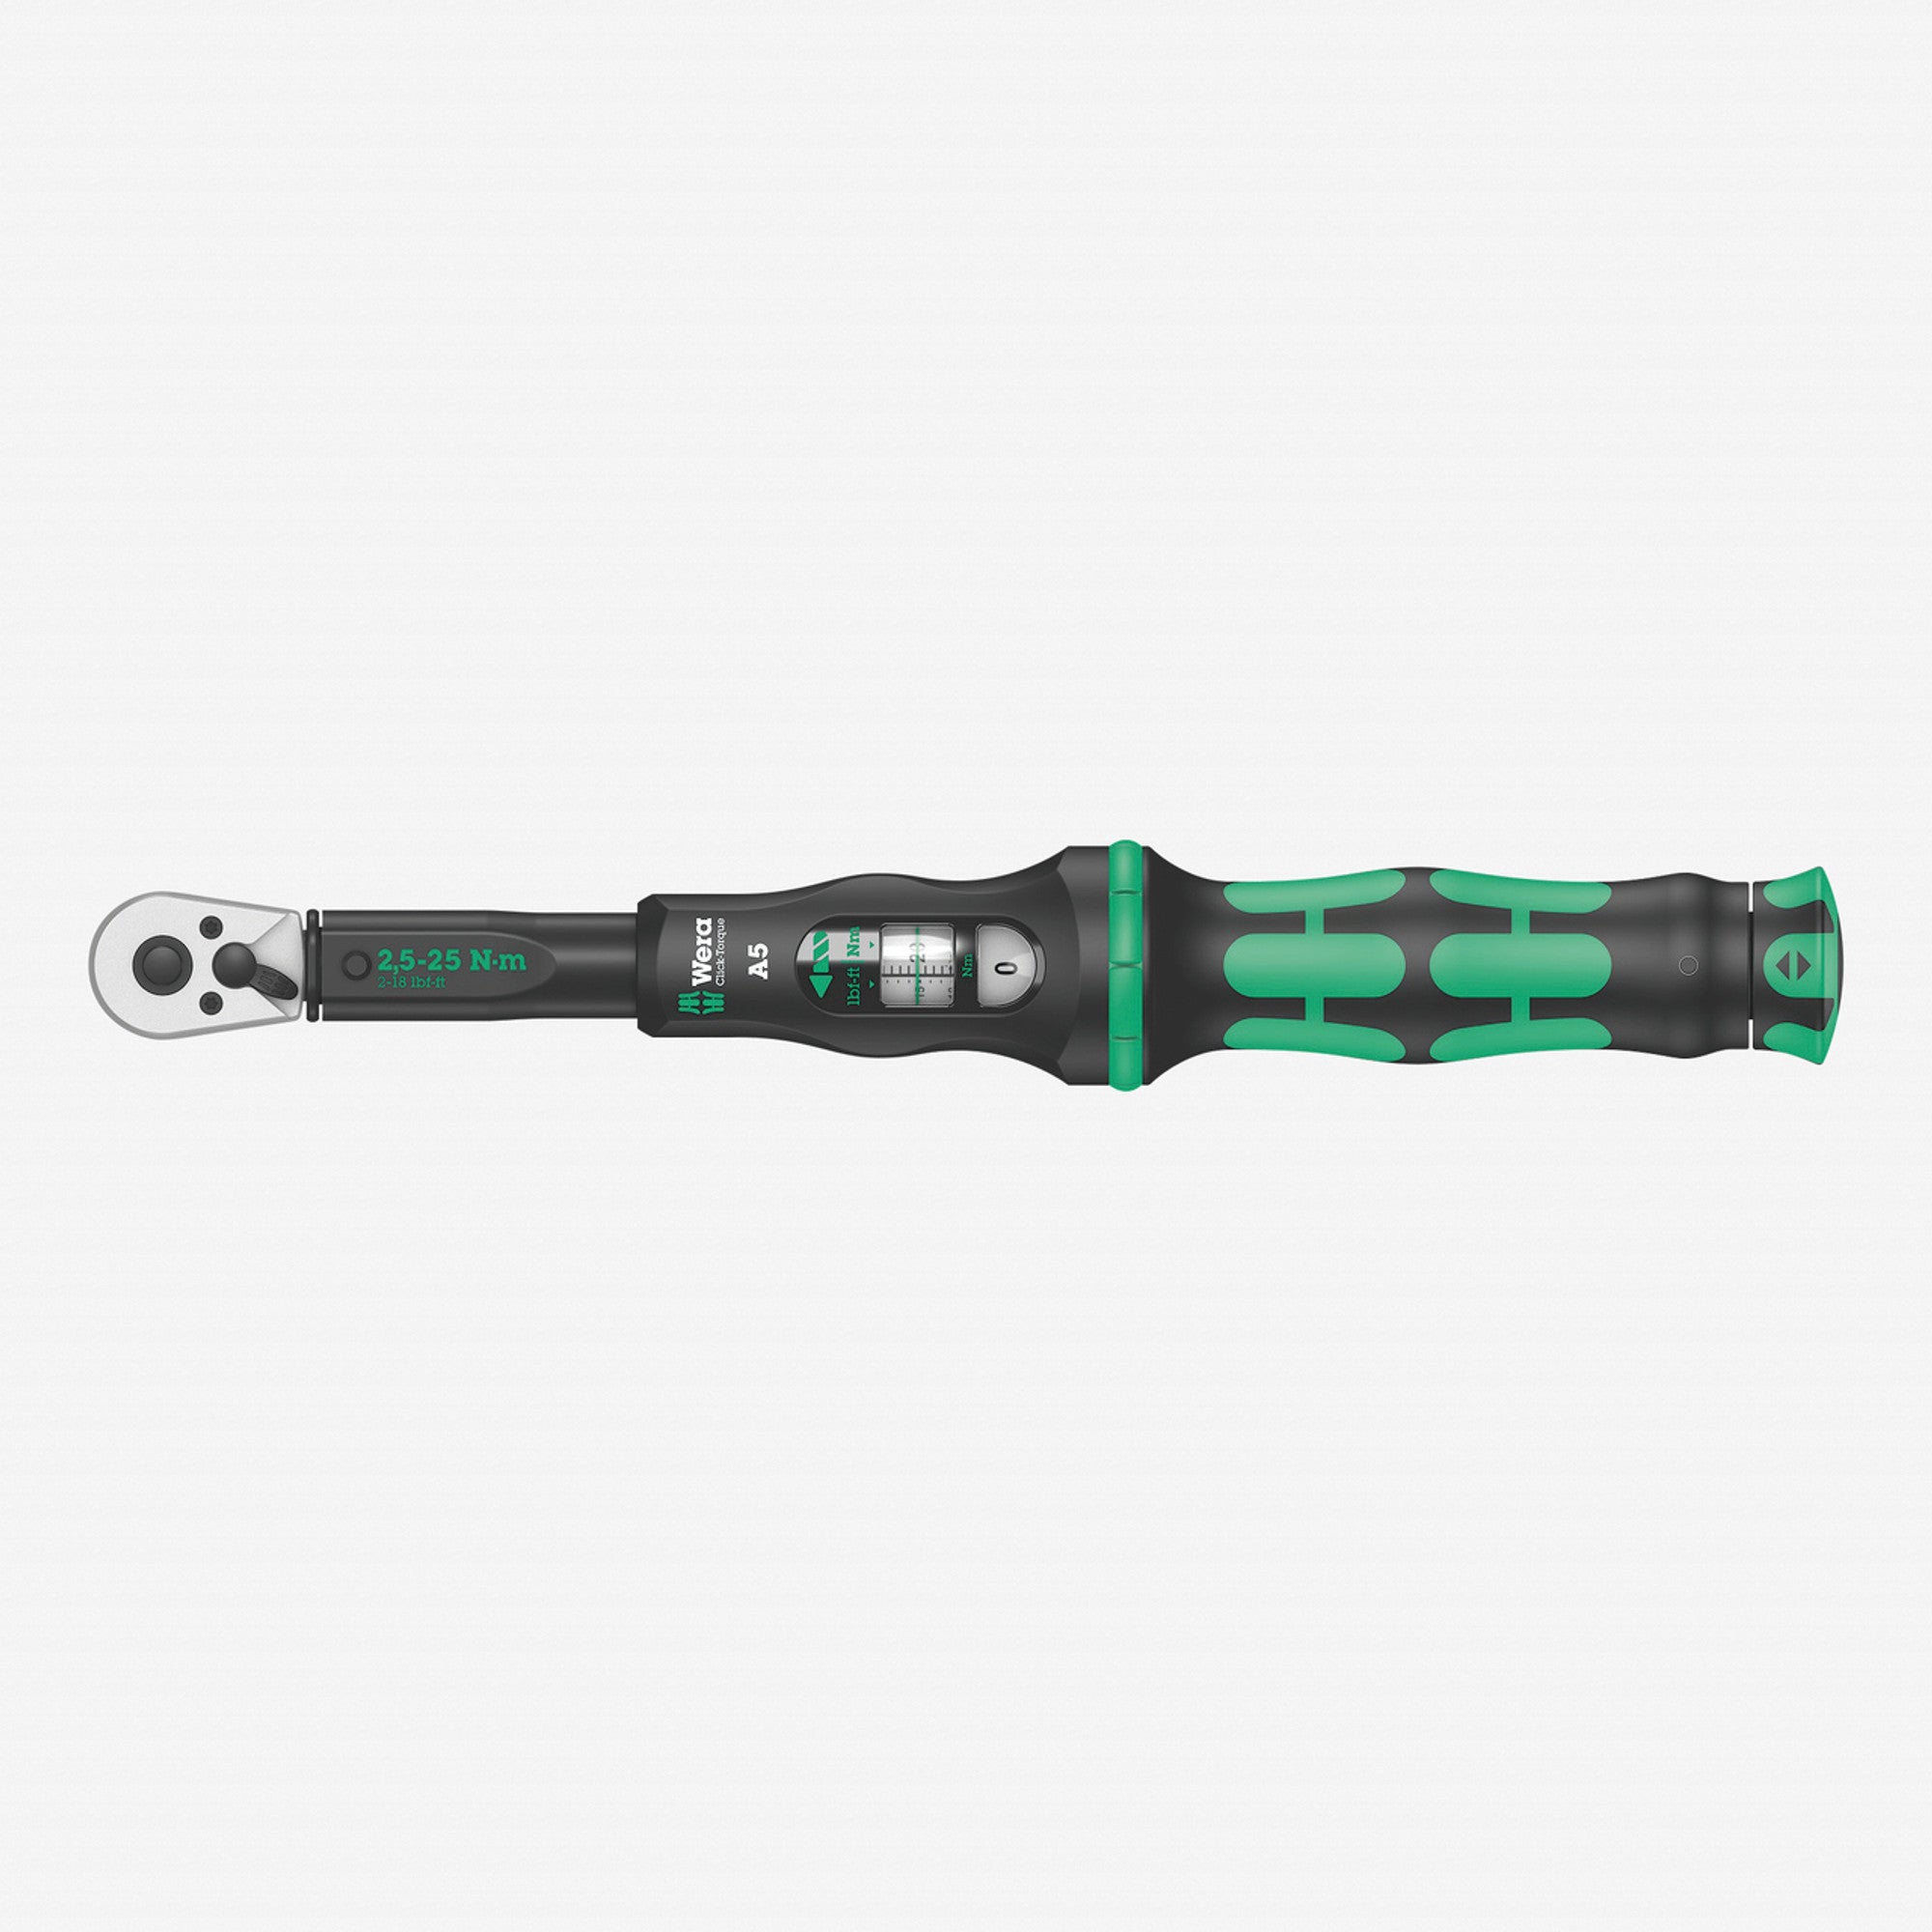 Wera Click-Torque A 5 torque wrench with reversible ratchet, 2.5-25 Nm (05075604001) - Apollo Industries 